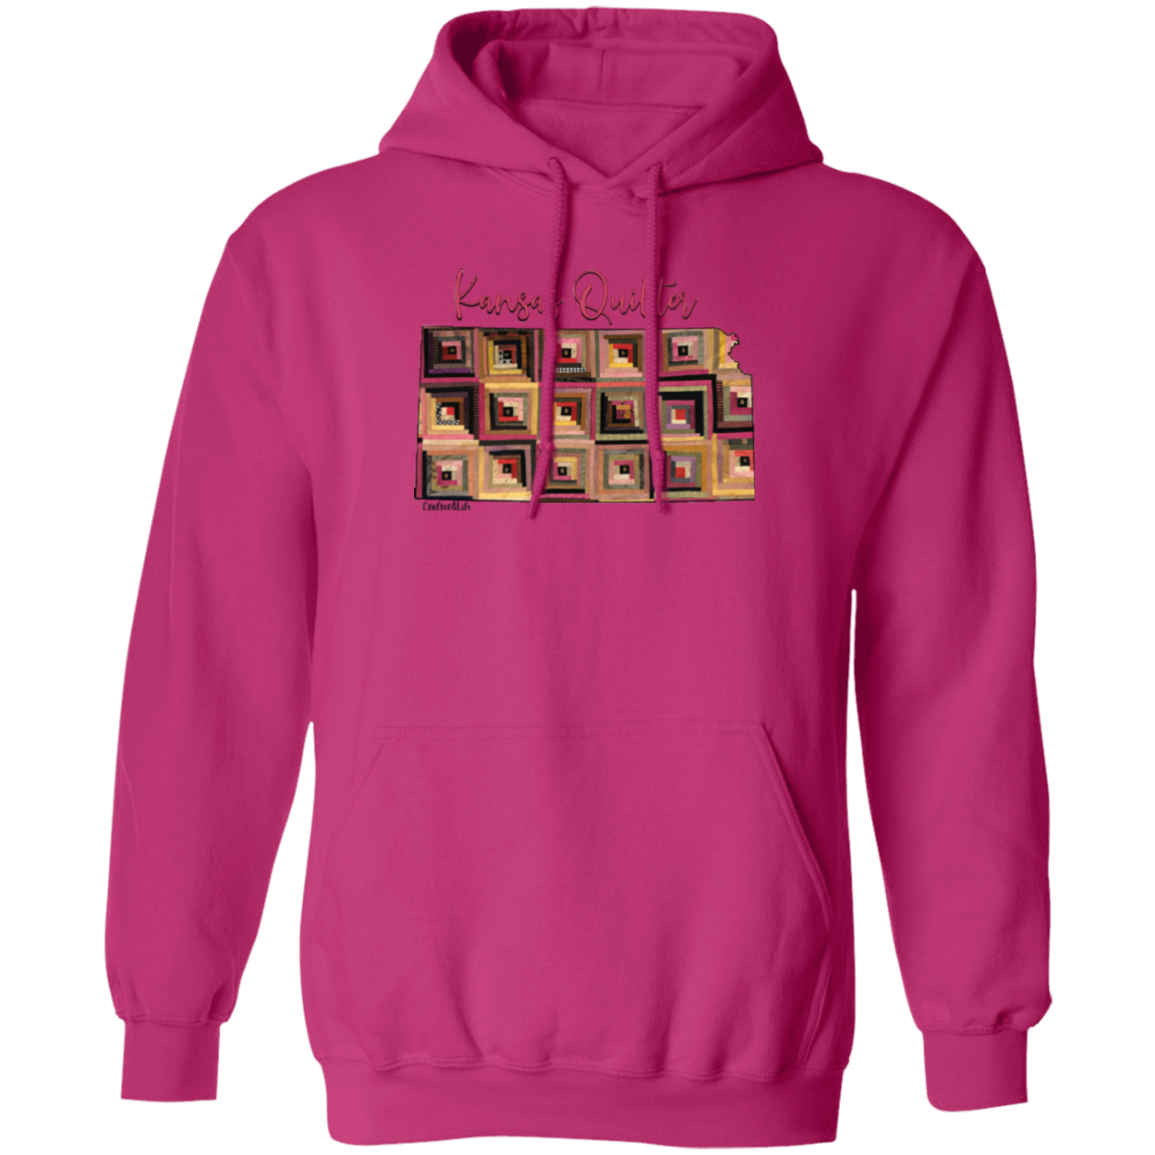 Kansas Quilter Pullover Hoodie, Gift for Quilting Friends and Family